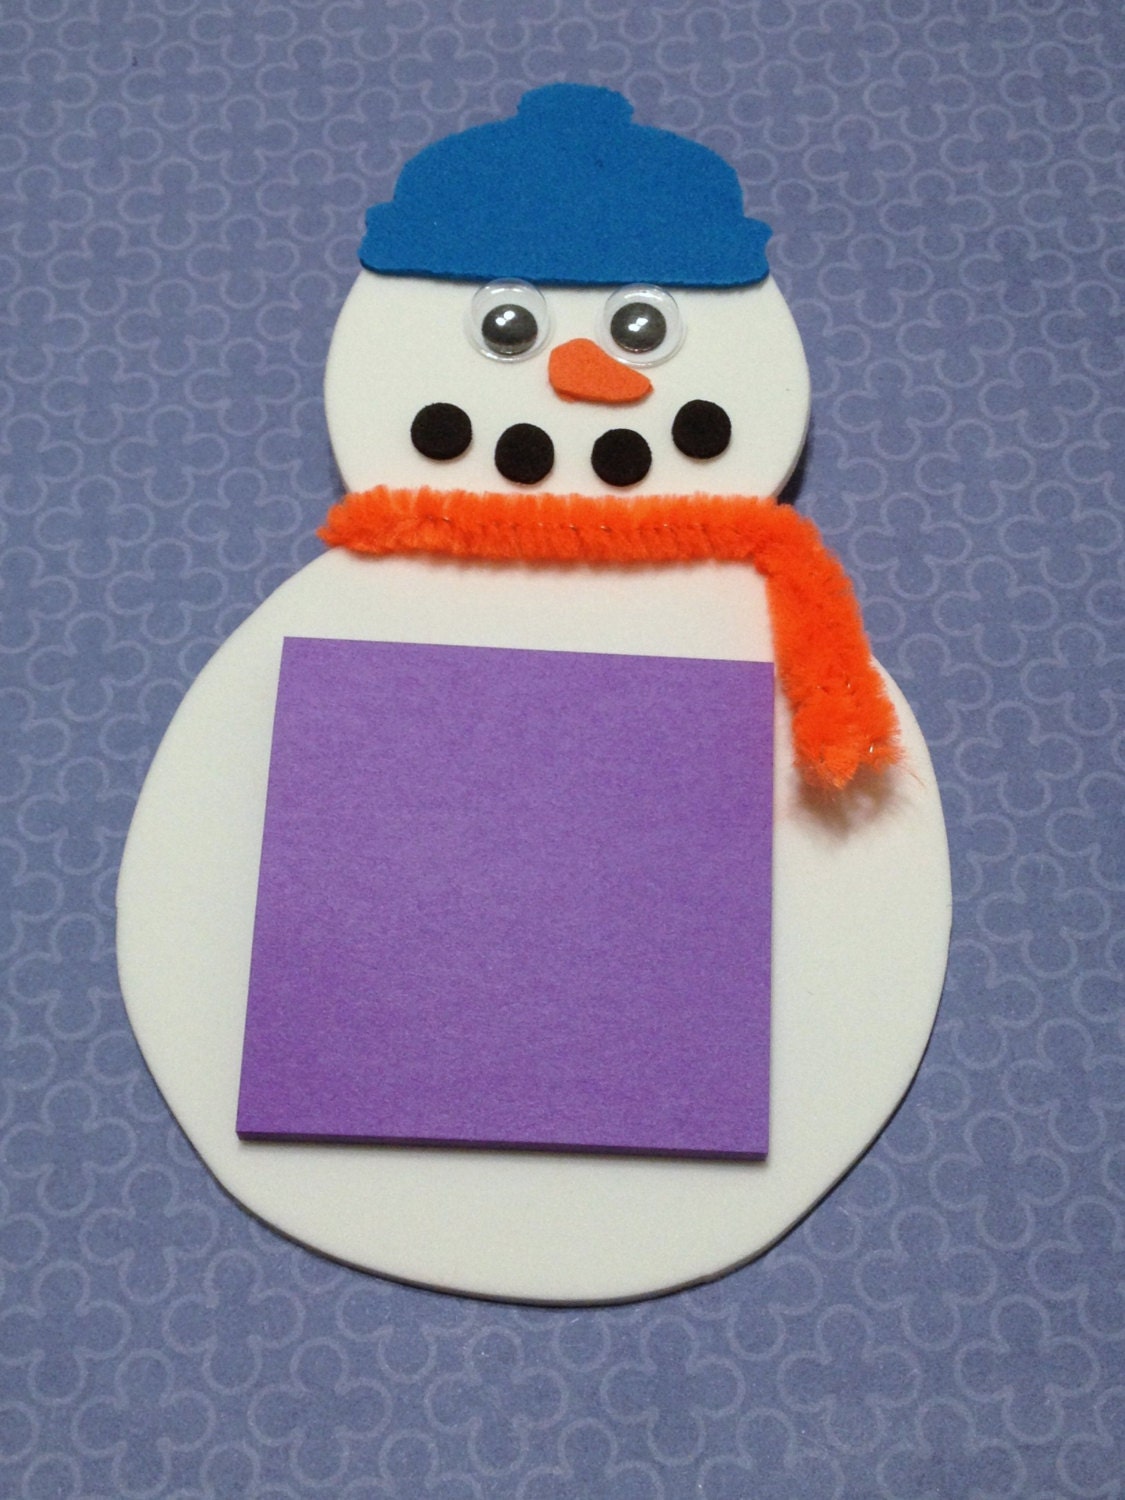 Snowman notepad messenger craft kit for kids birthday party favor ...